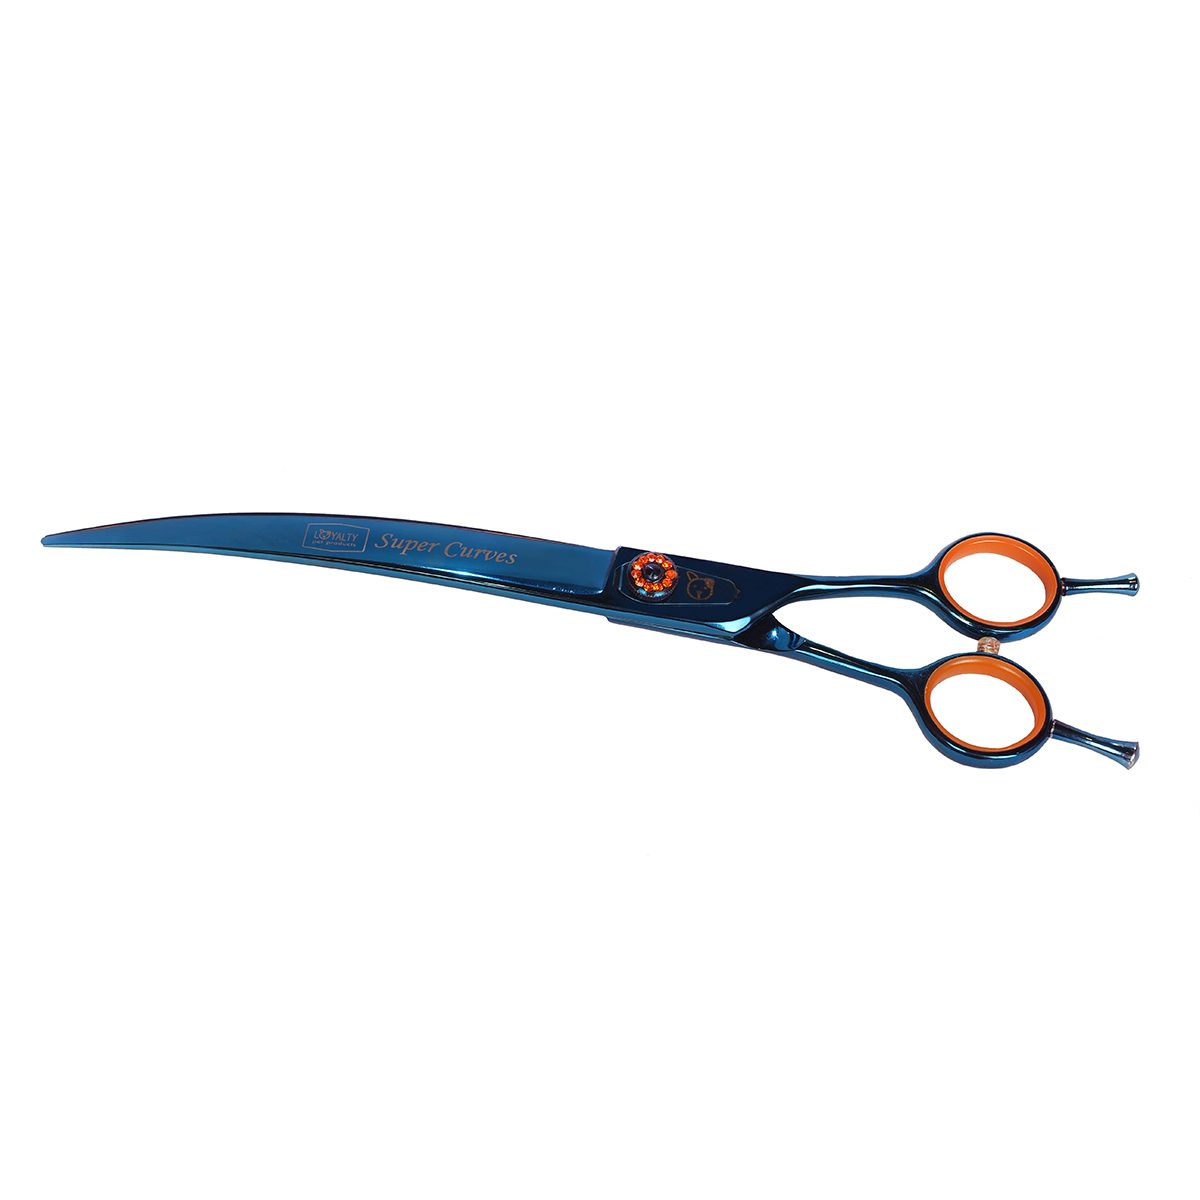 extreme curved grooming shears